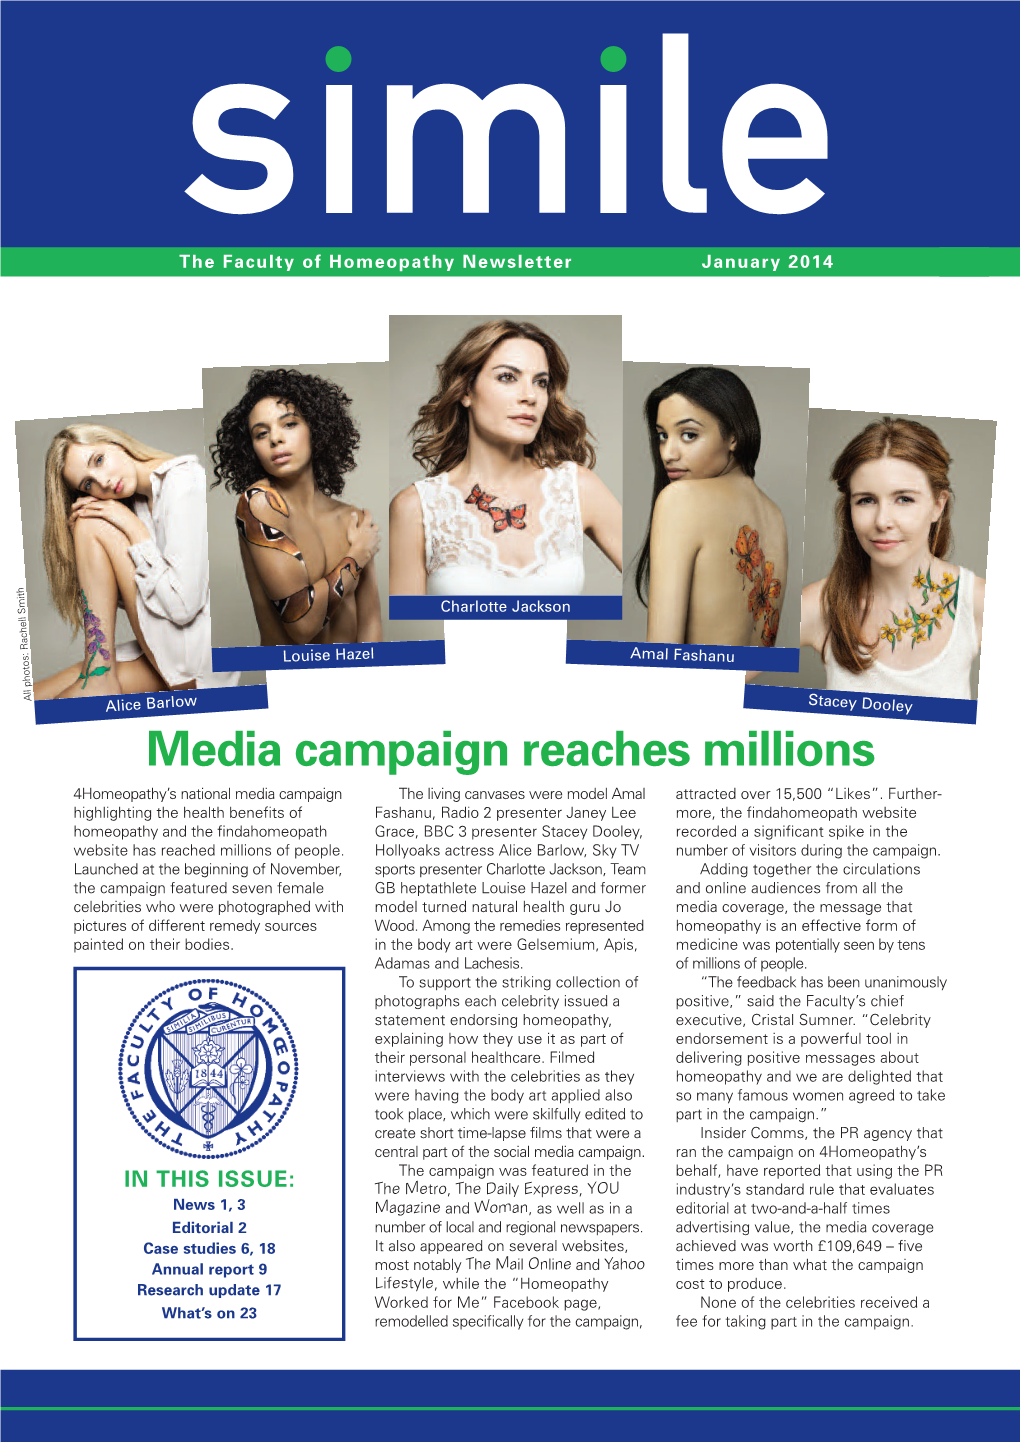 Media Campaign Reaches Millions 4Homeopathy’S National Media Campaign the Living Canvases Were Model Amal Attracted Over 15,500 “Likes”